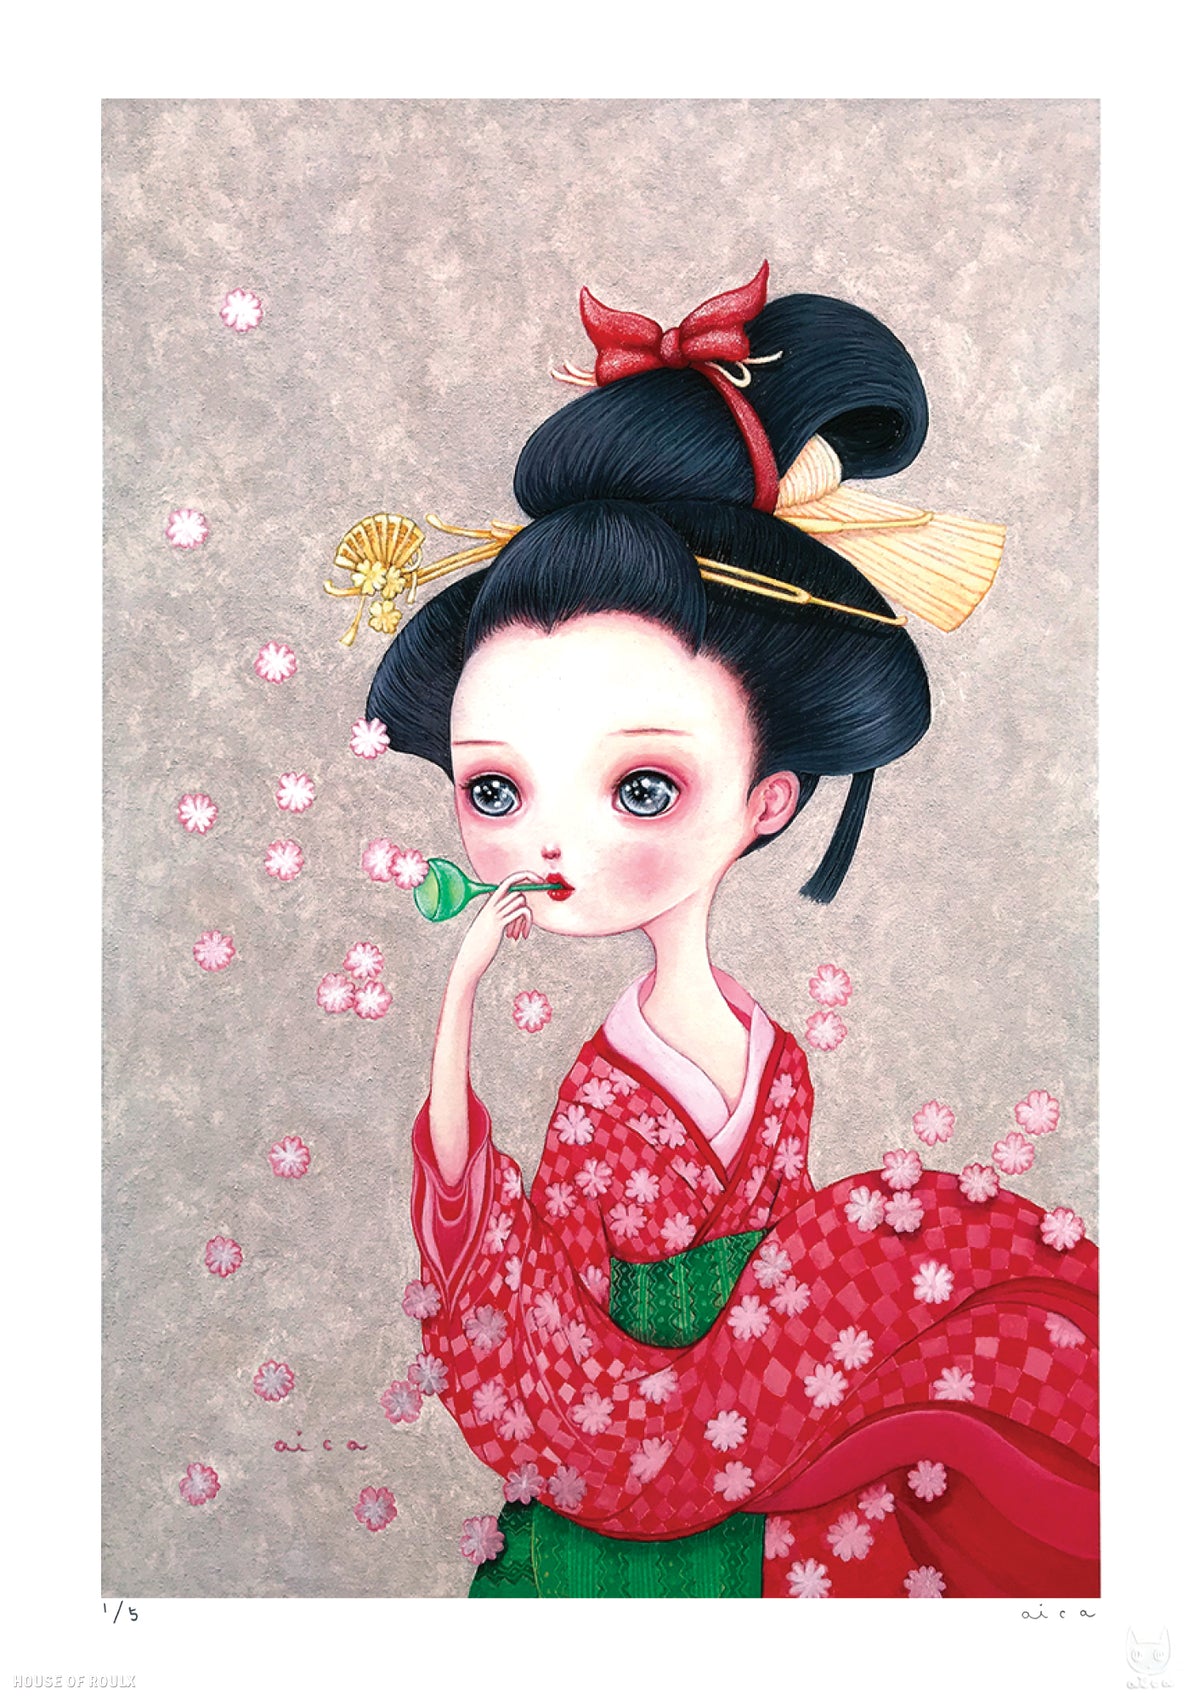 aica &quot;The Sound of Blooming Cherry Blossoms&quot; - Hand-Embellished Variant, Edition of 5 - 12 x 17&quot;